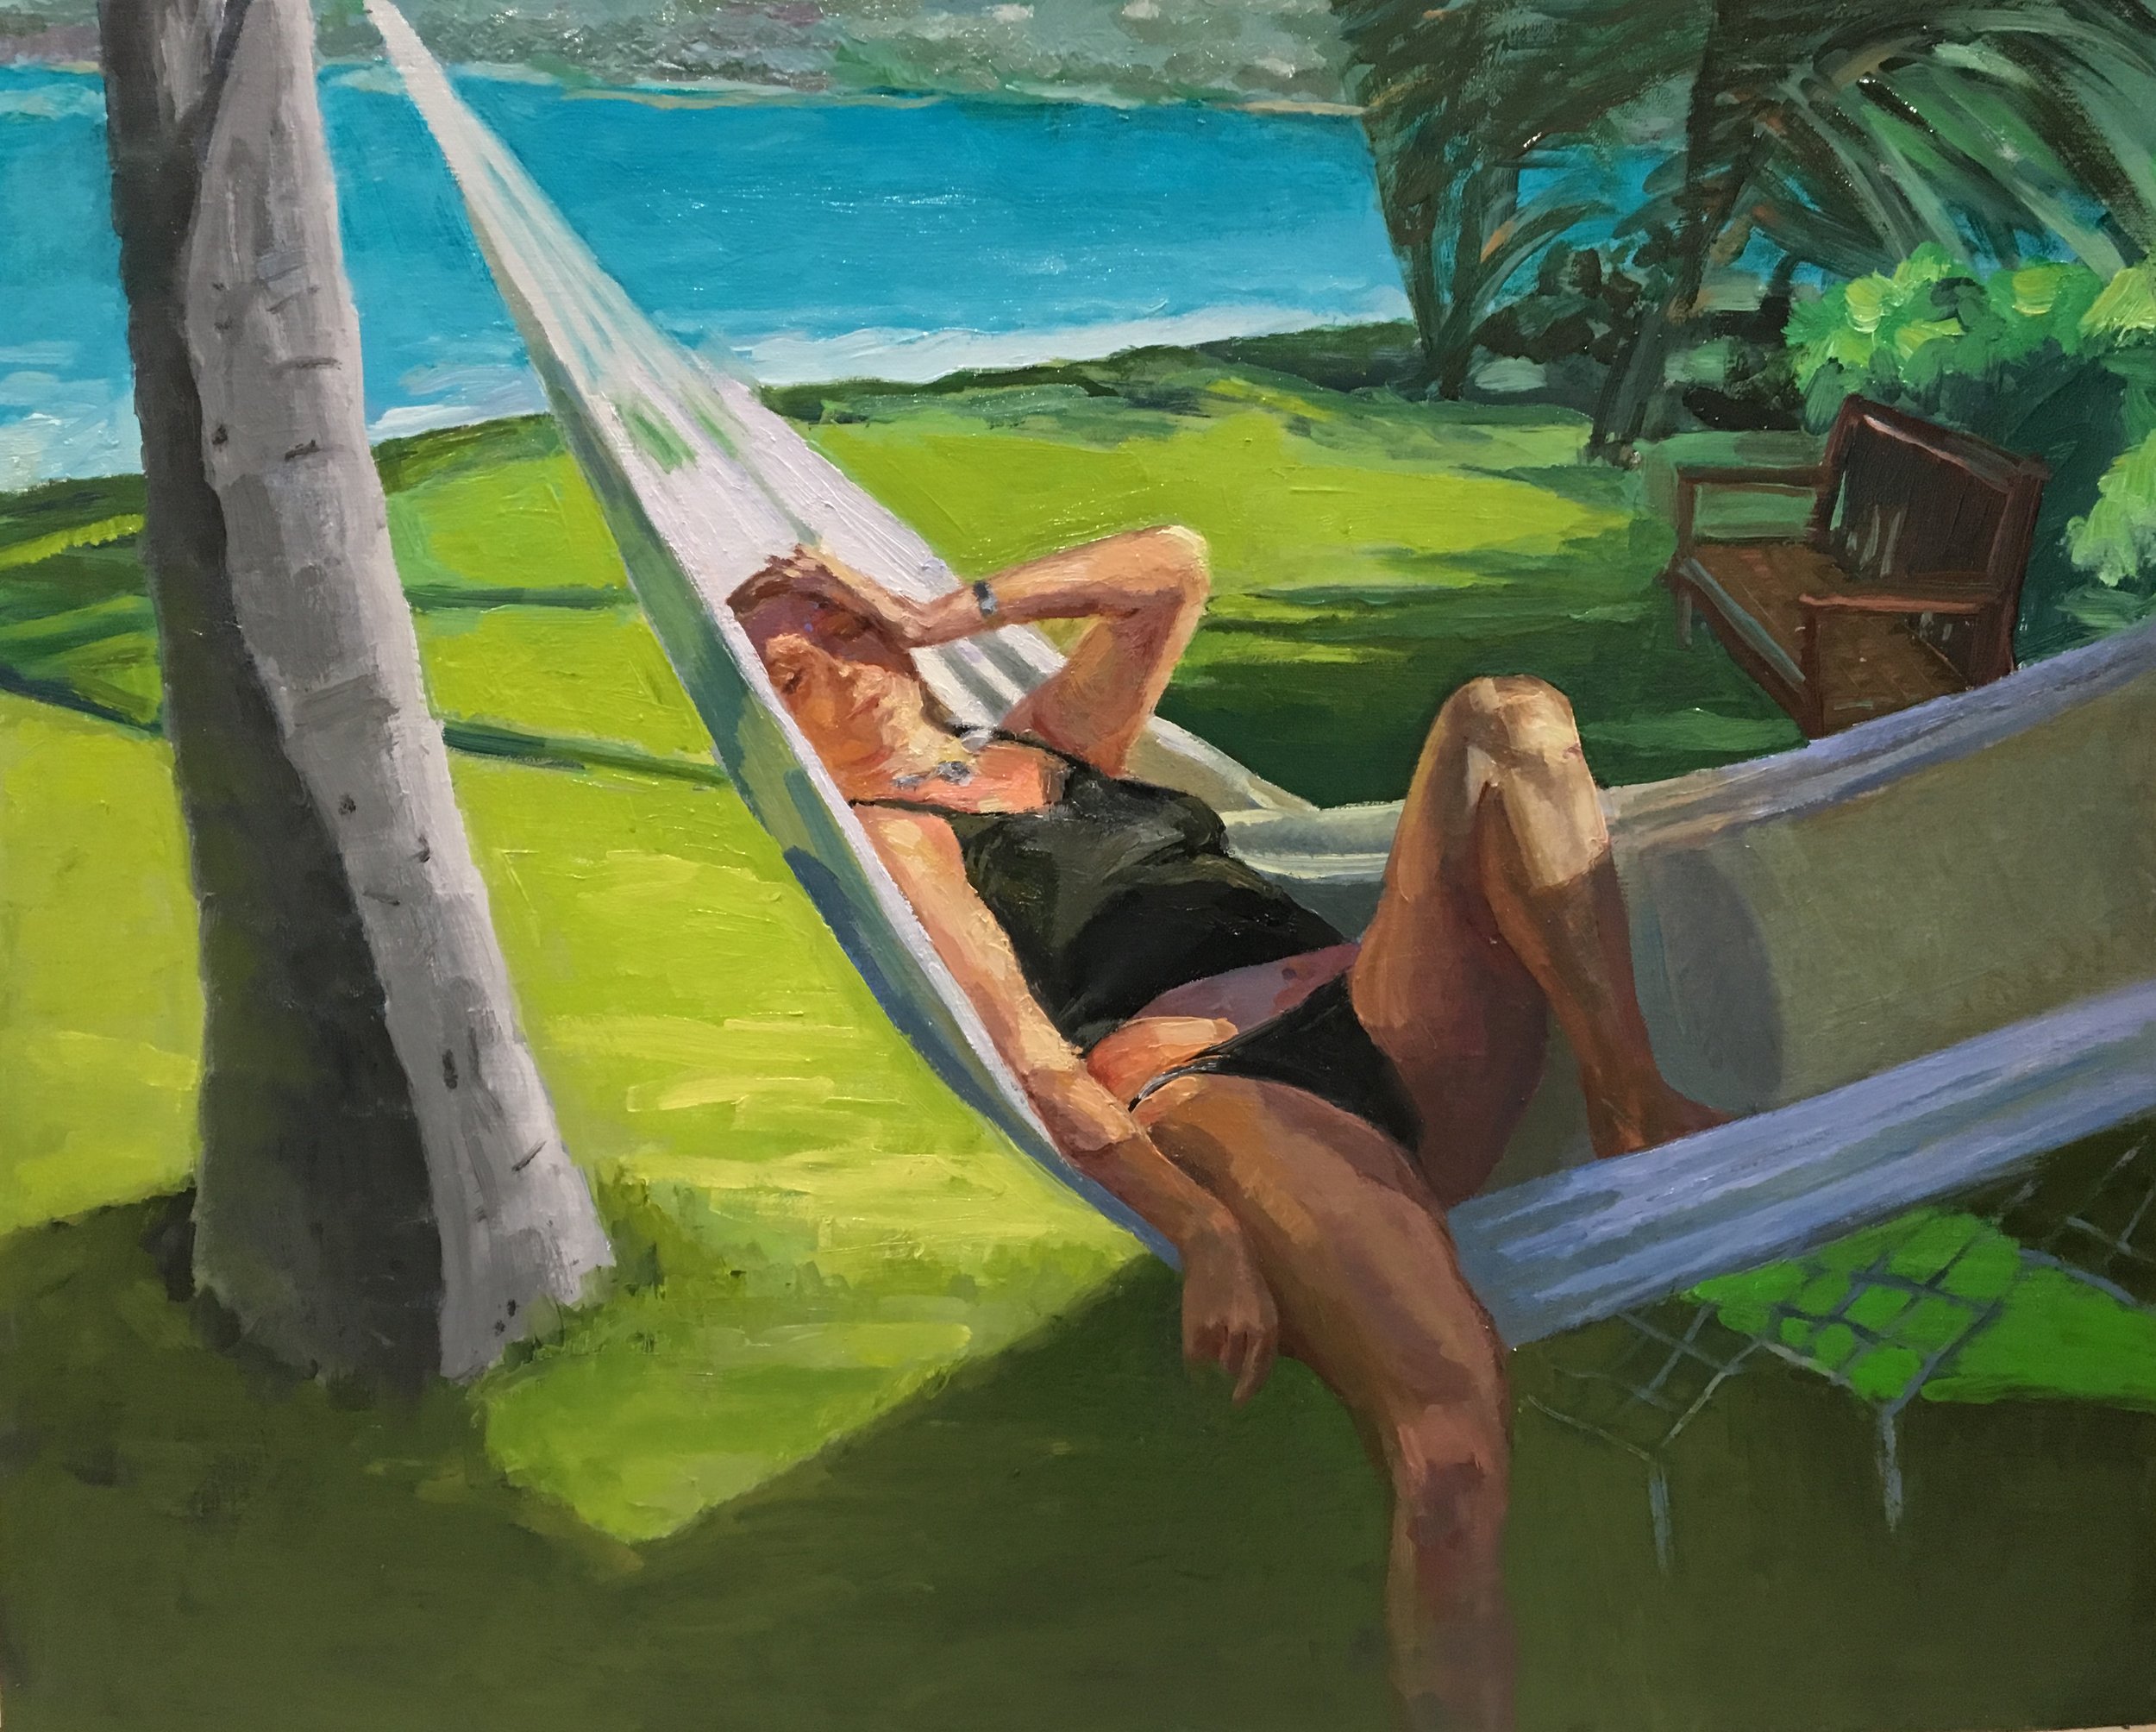 In the hammock, 2019, Oil on board, 16x20 inches.